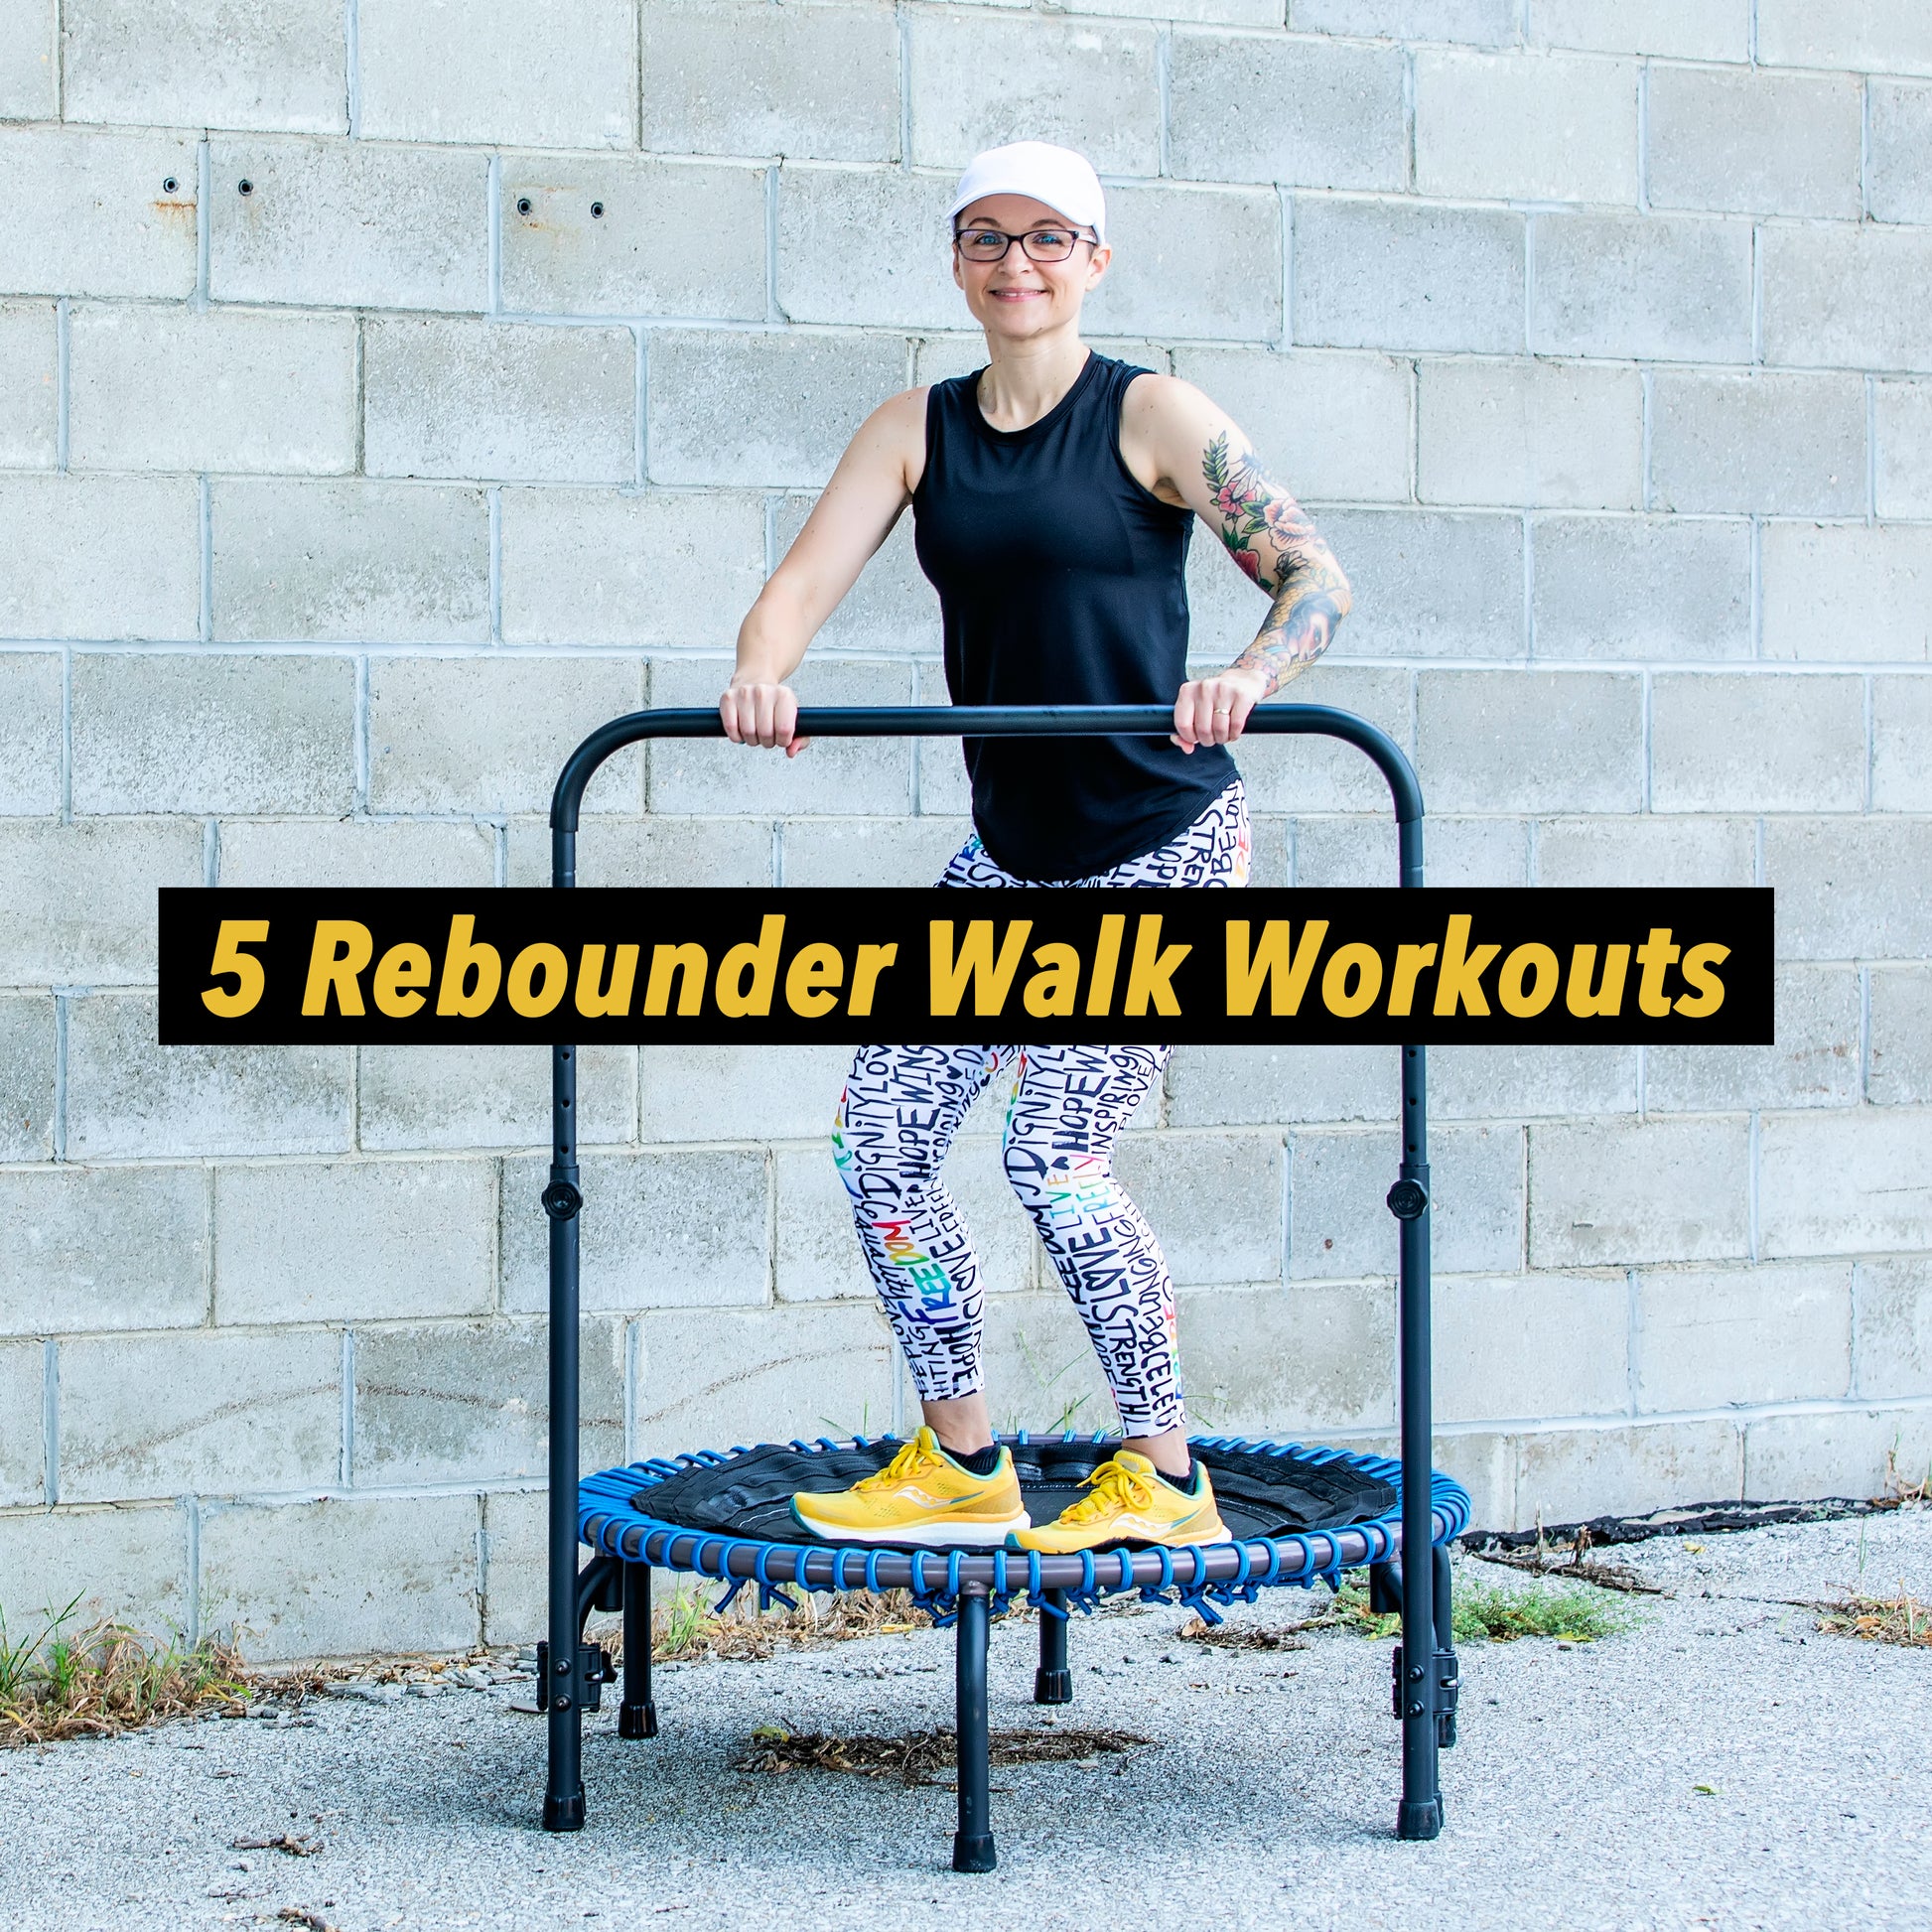 Earth & Owl 5 Rebounder Walk Workouts for Beginners and Seniors